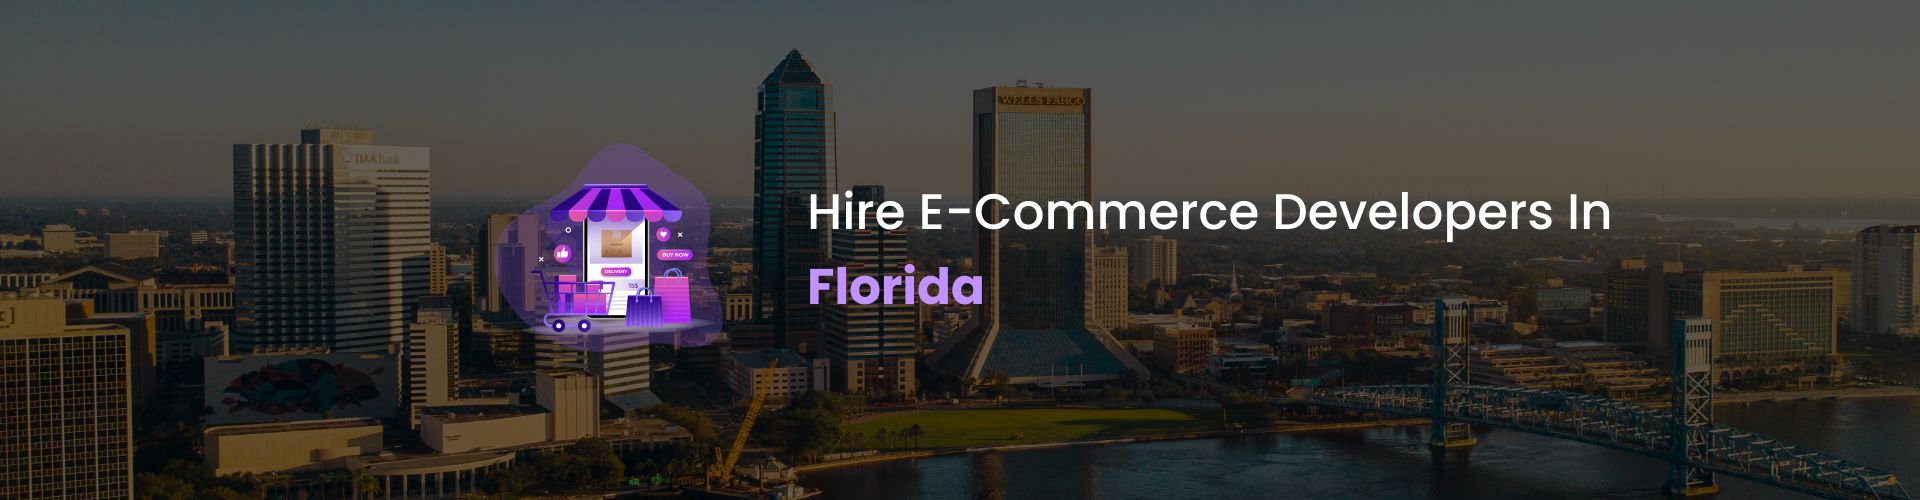 hire ecommerce developers in florida